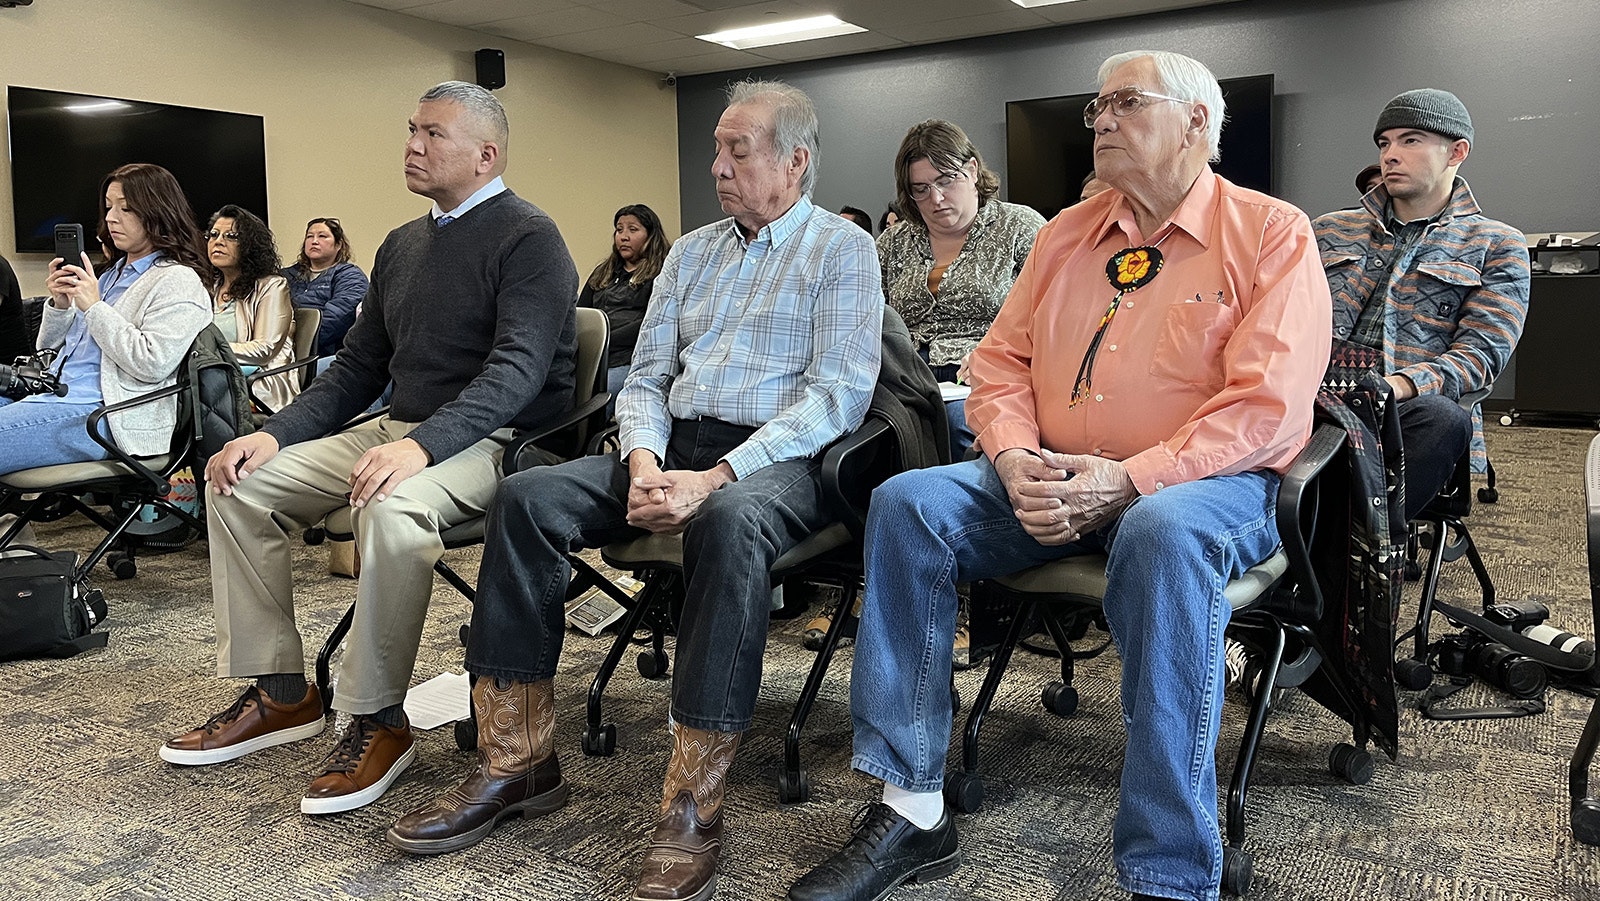 Eastern Shoshone Business Council Member John Washakie, right, and other Wyoming tribal members and press at a Feb. 8 FBI press conference to address murders and other crimes.